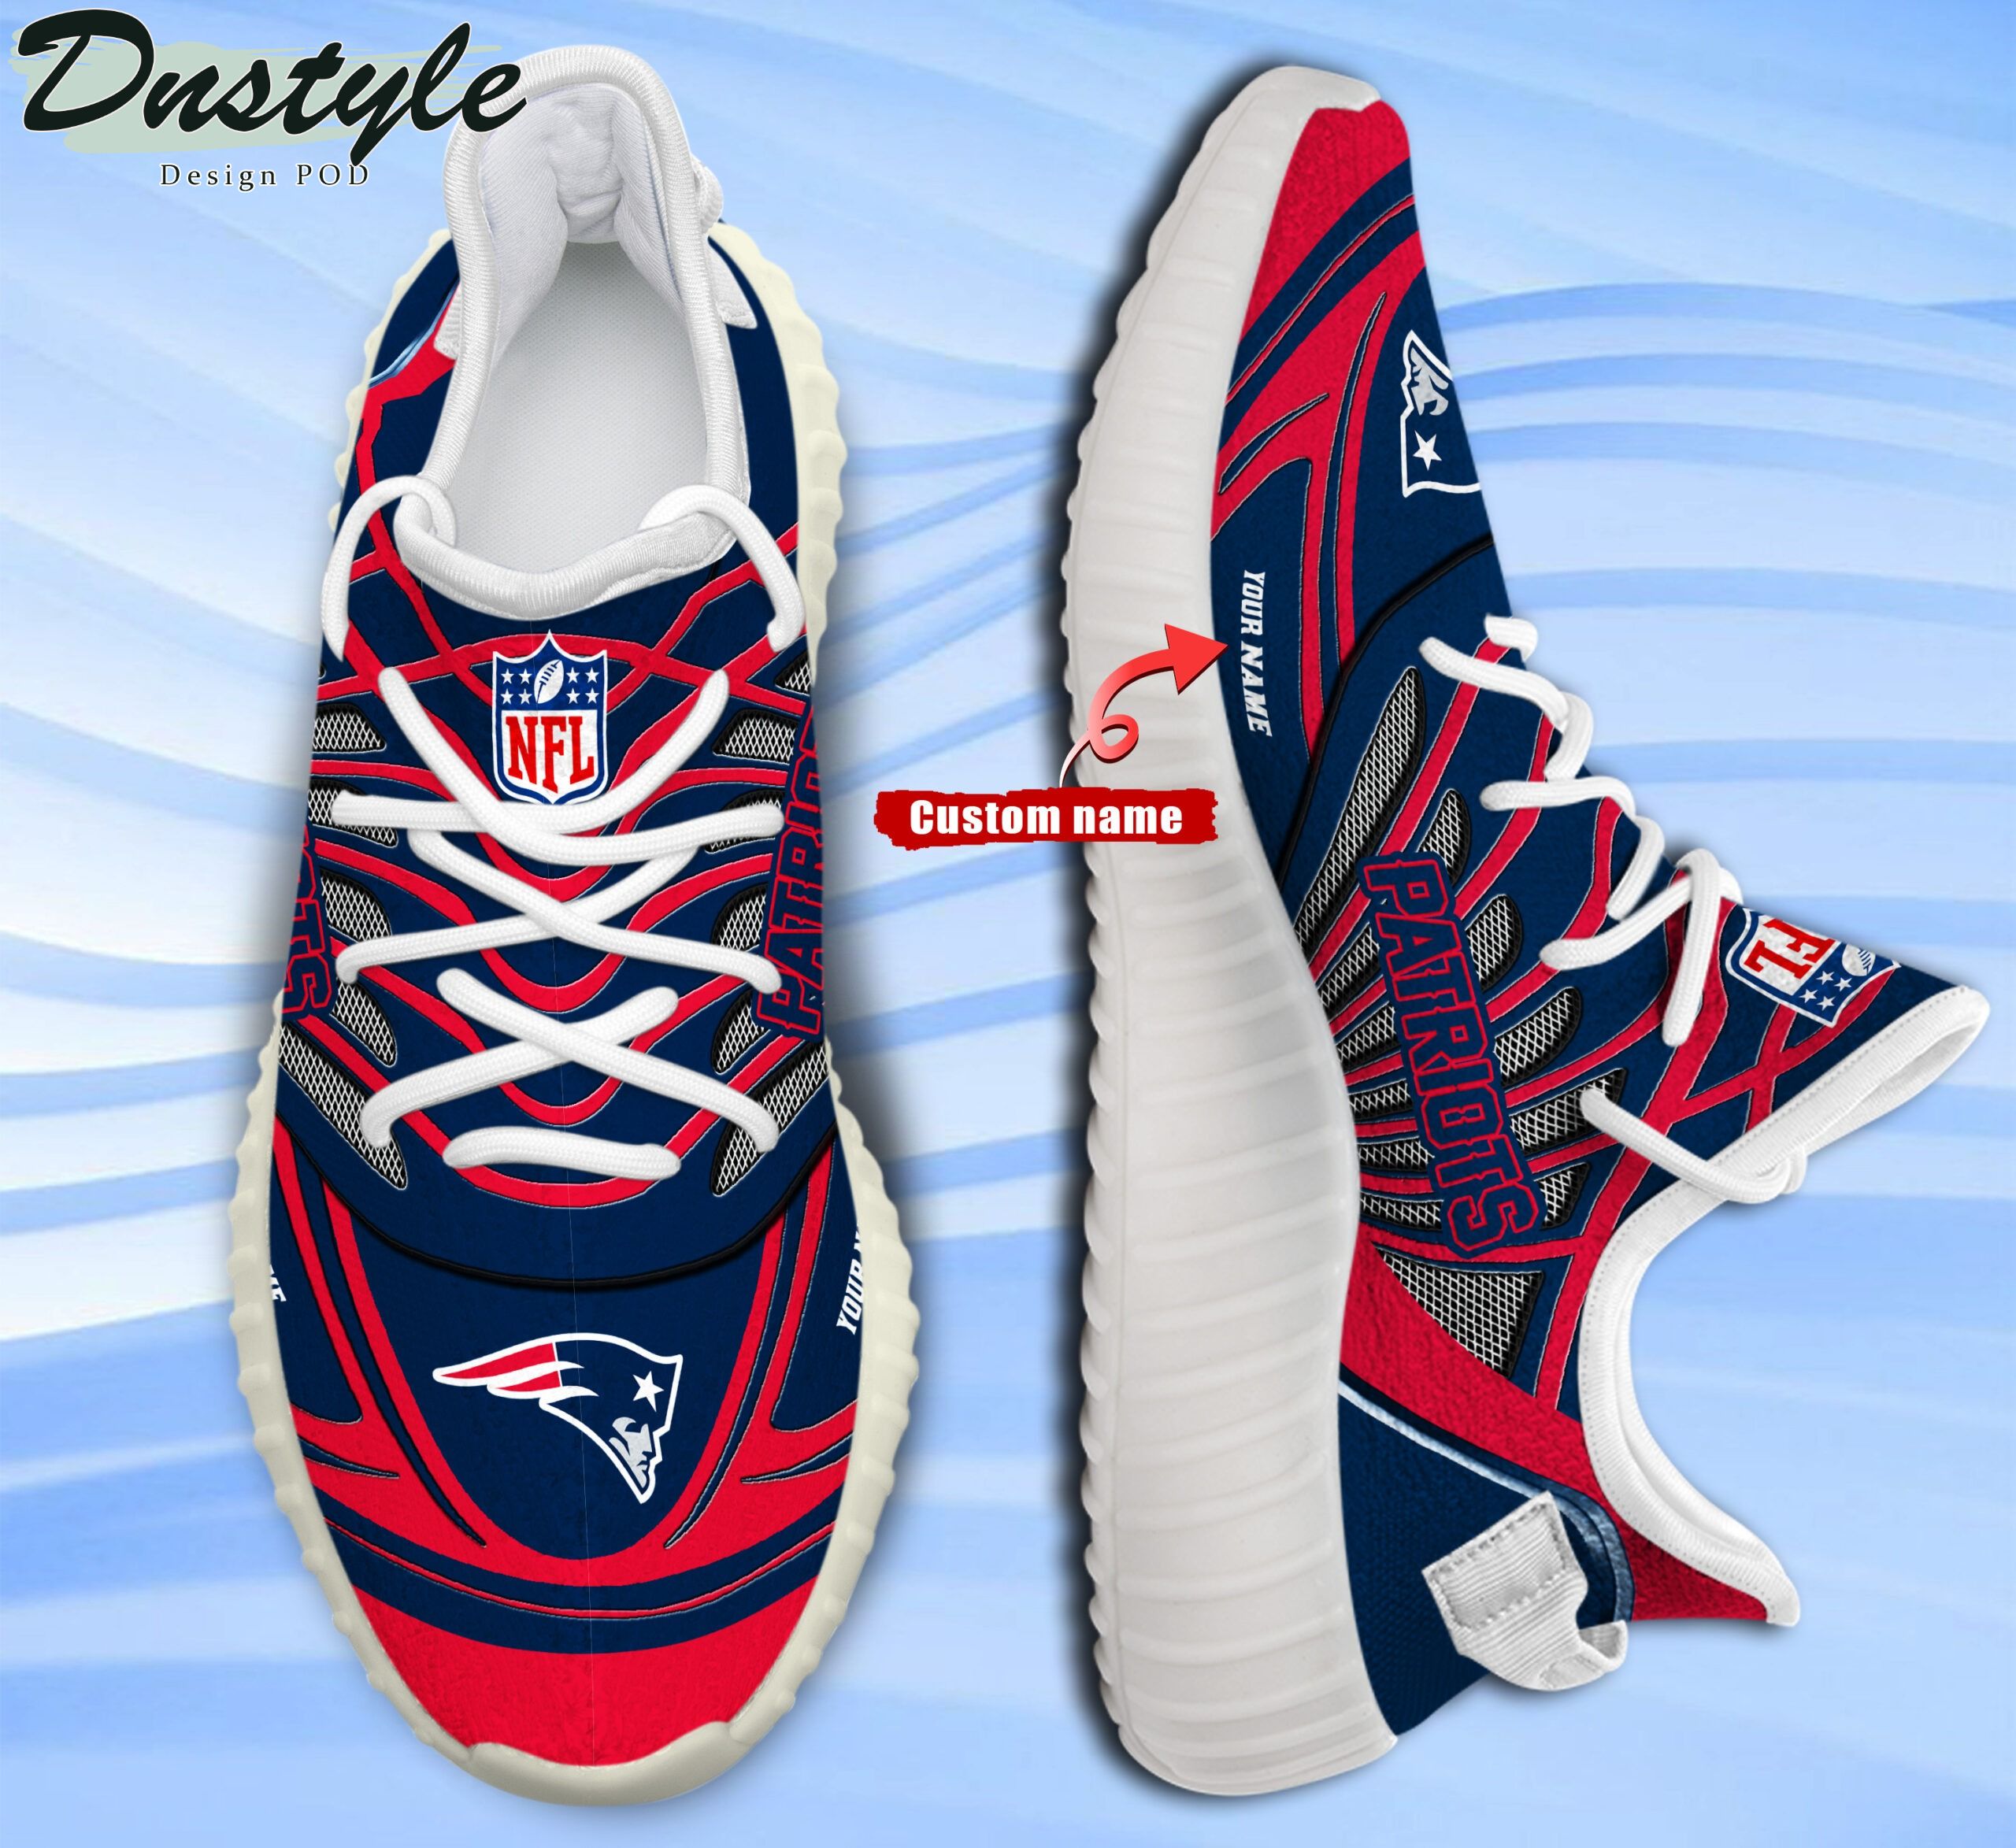 New England Patriots Personalized Yeezy Boost